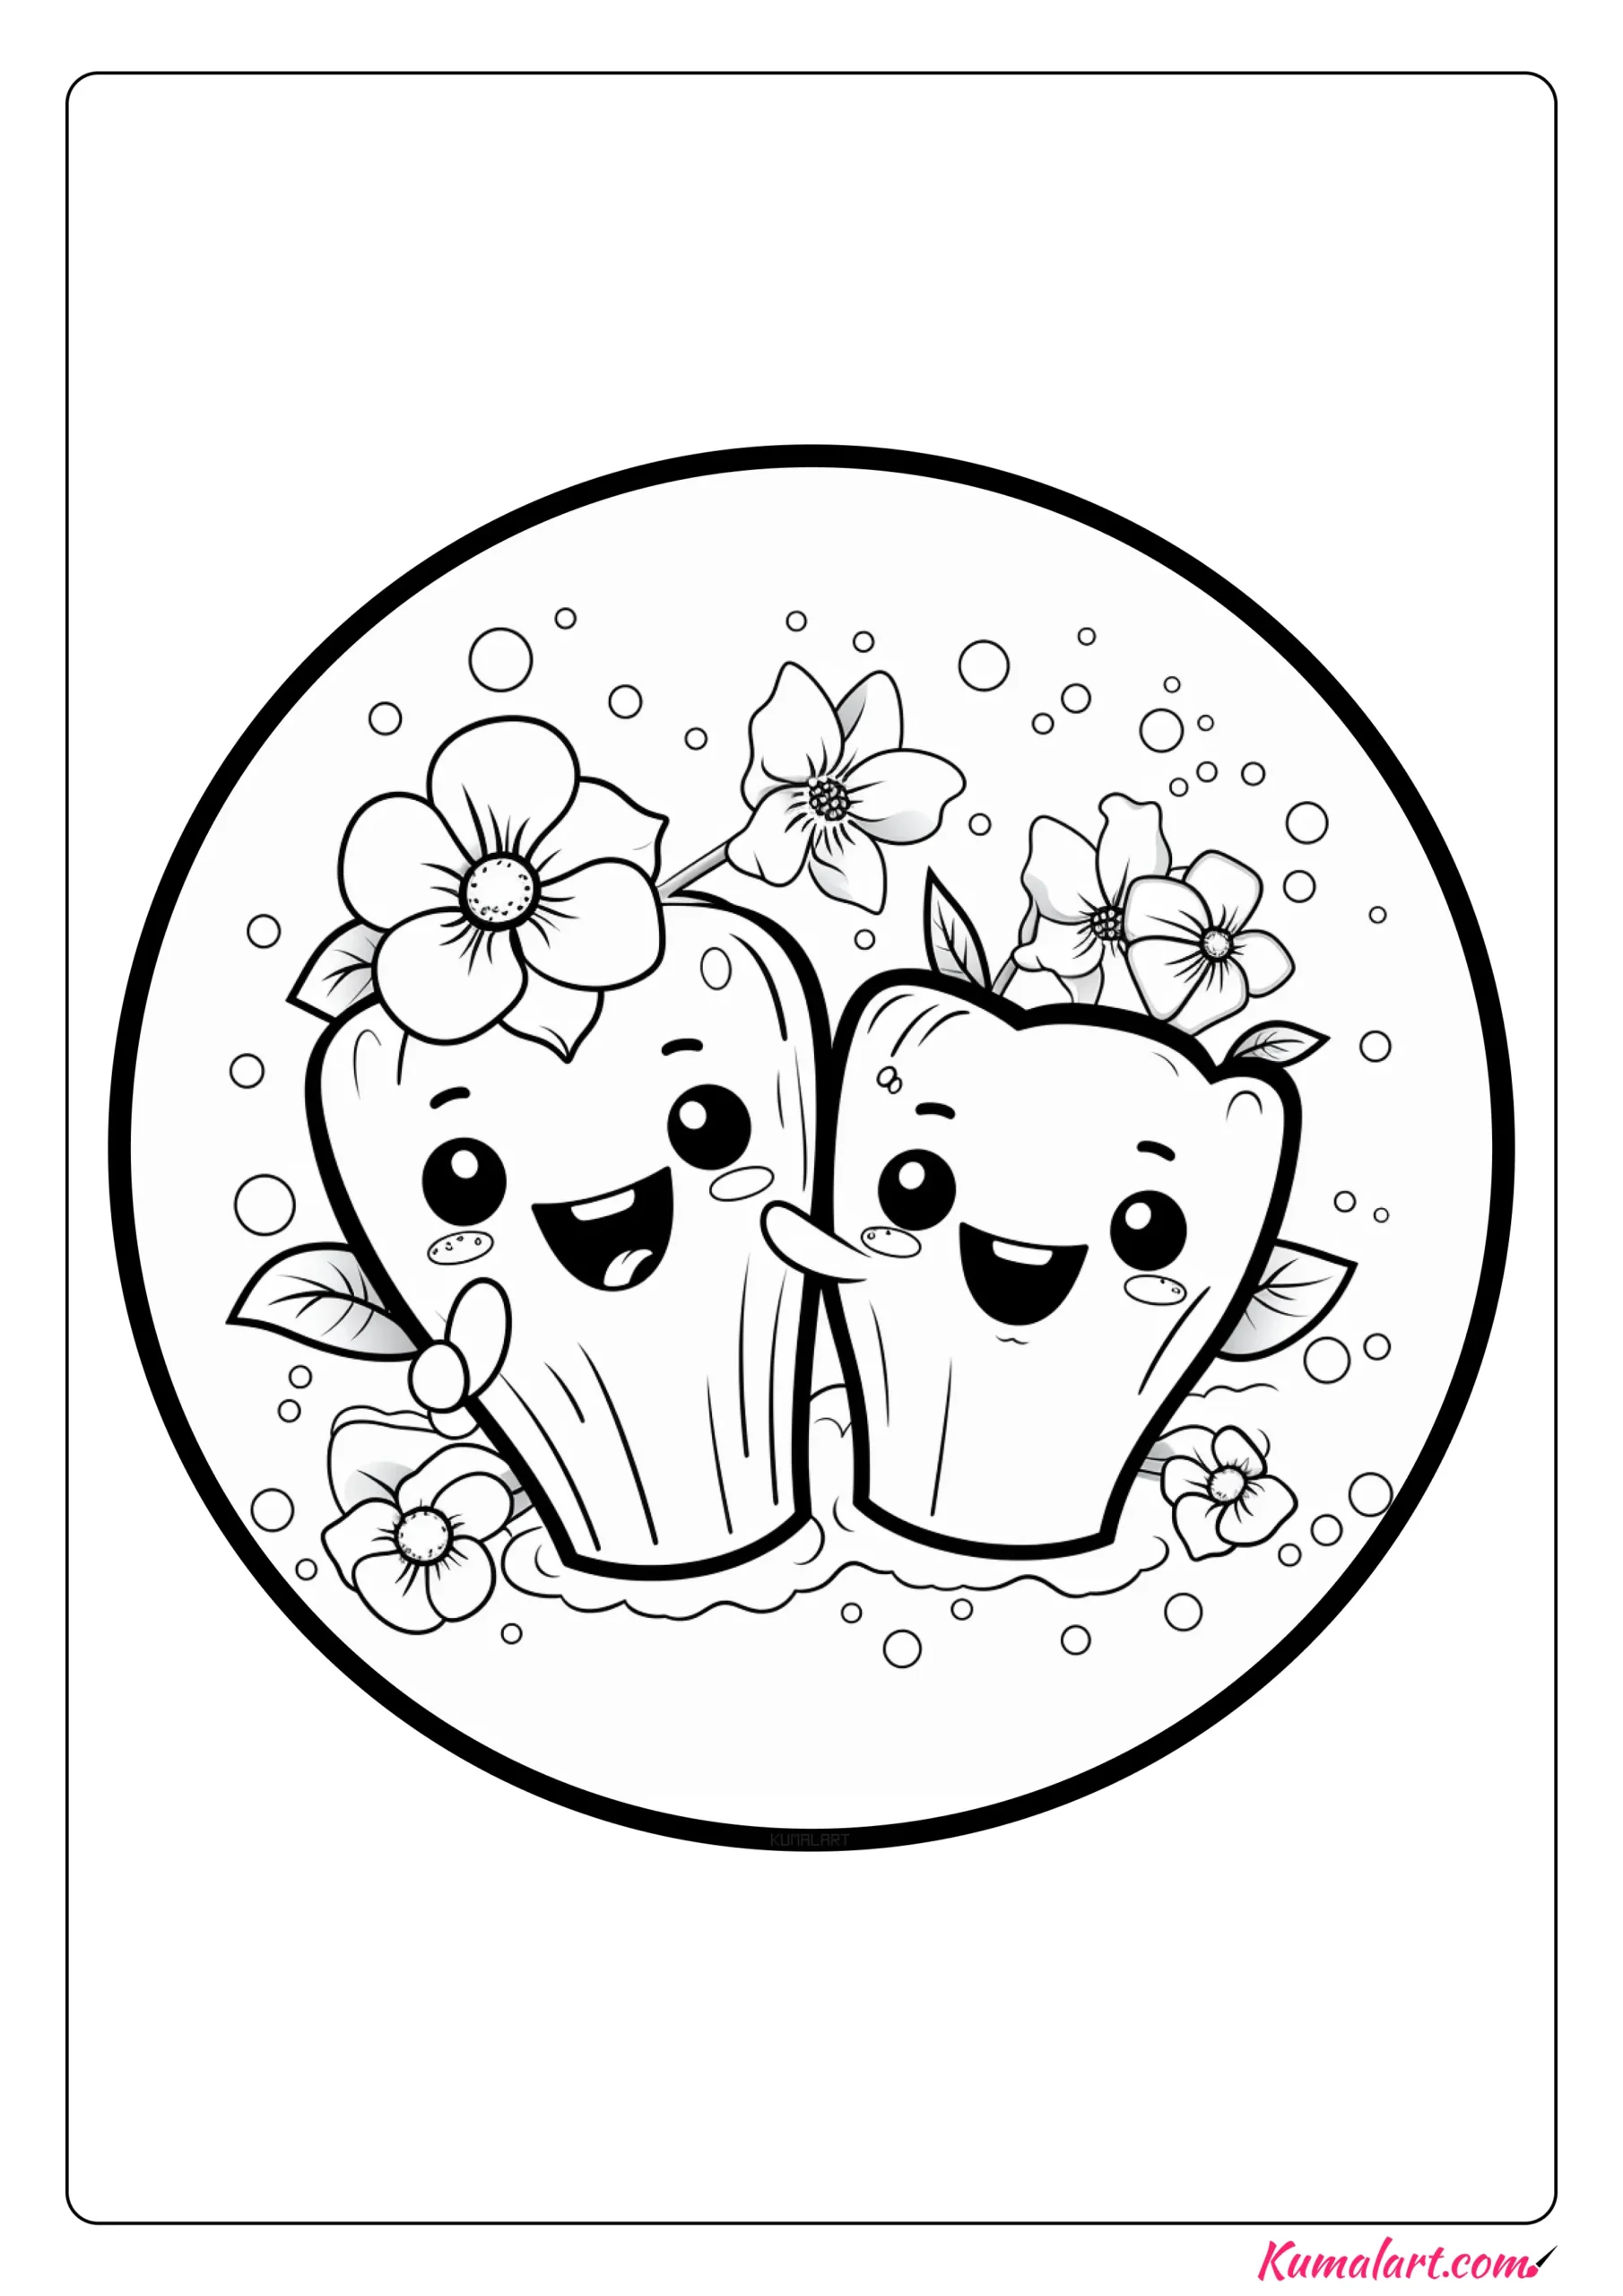 Pretty Tooth Brushing Coloring Page